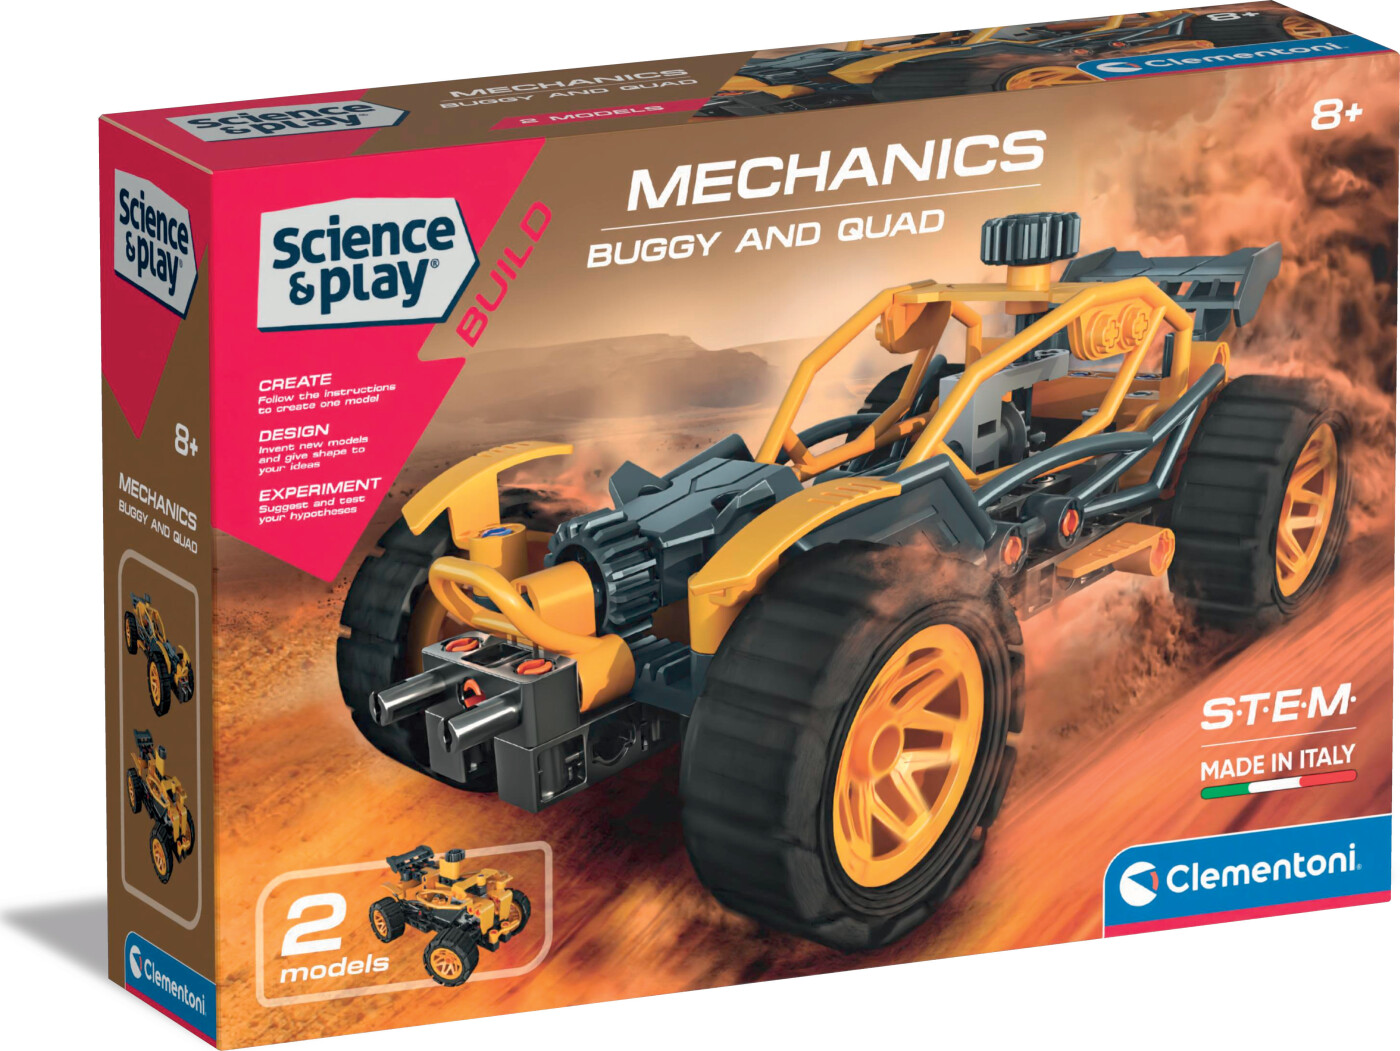 Se Clementoni - Science And Play Build - Mechanics - Buggy And Quad hos Gucca.dk